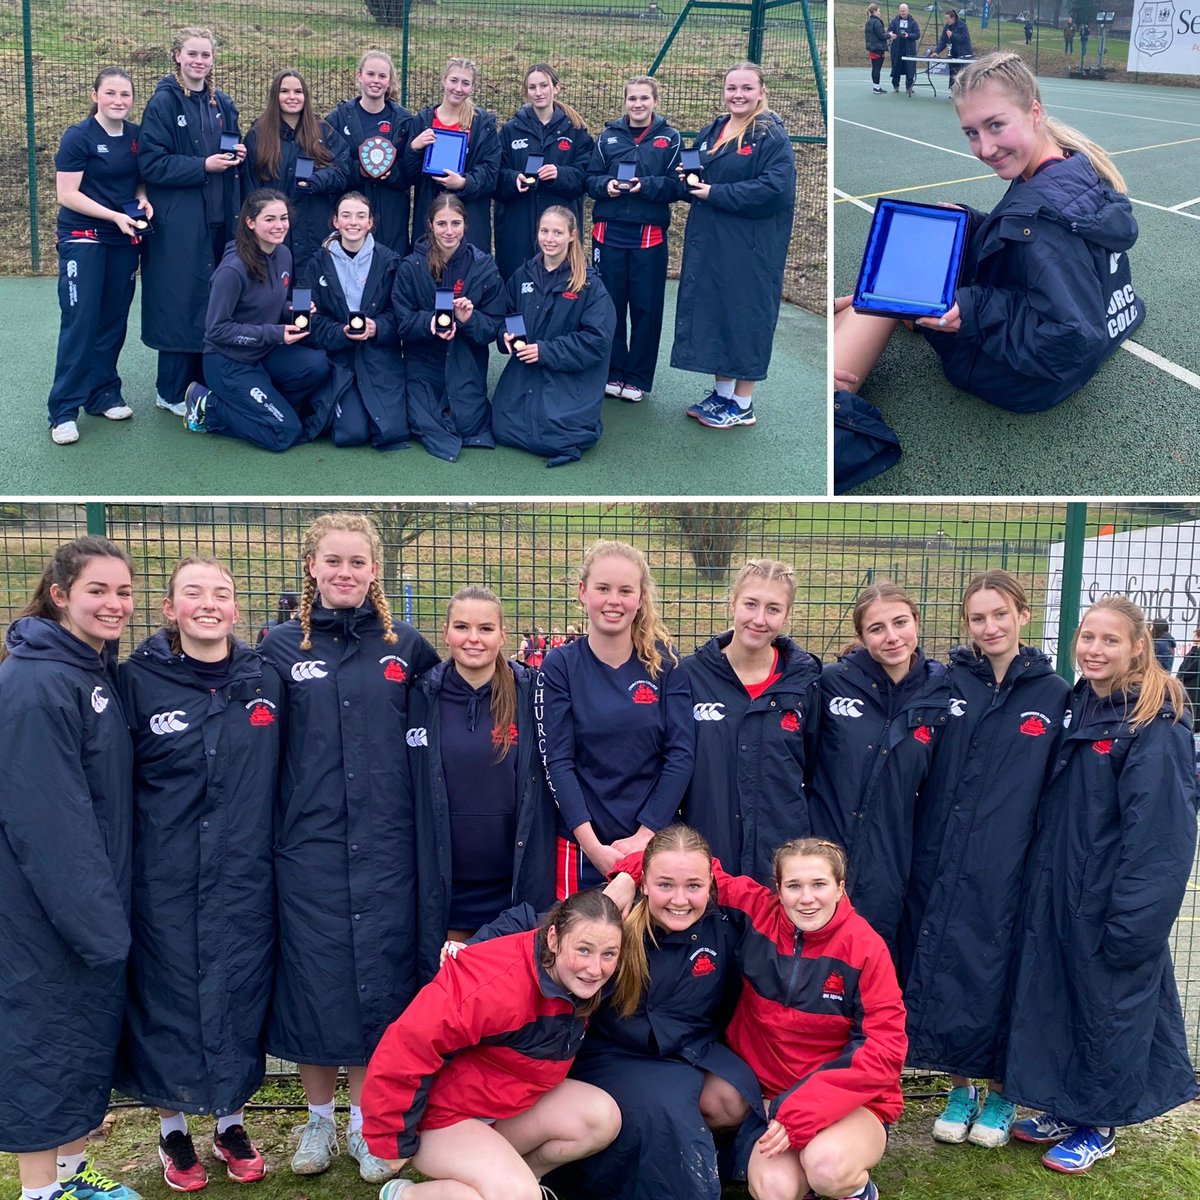 A superb day for the 1sts - solid contributions from all 12 players meant we came home with some team silverware - special congrats to Alice who was also awarded Player of the Tournament! #TeamChurchers #ShieldWinners #FabStartToTheSeason #TeamWorkAtItsBest